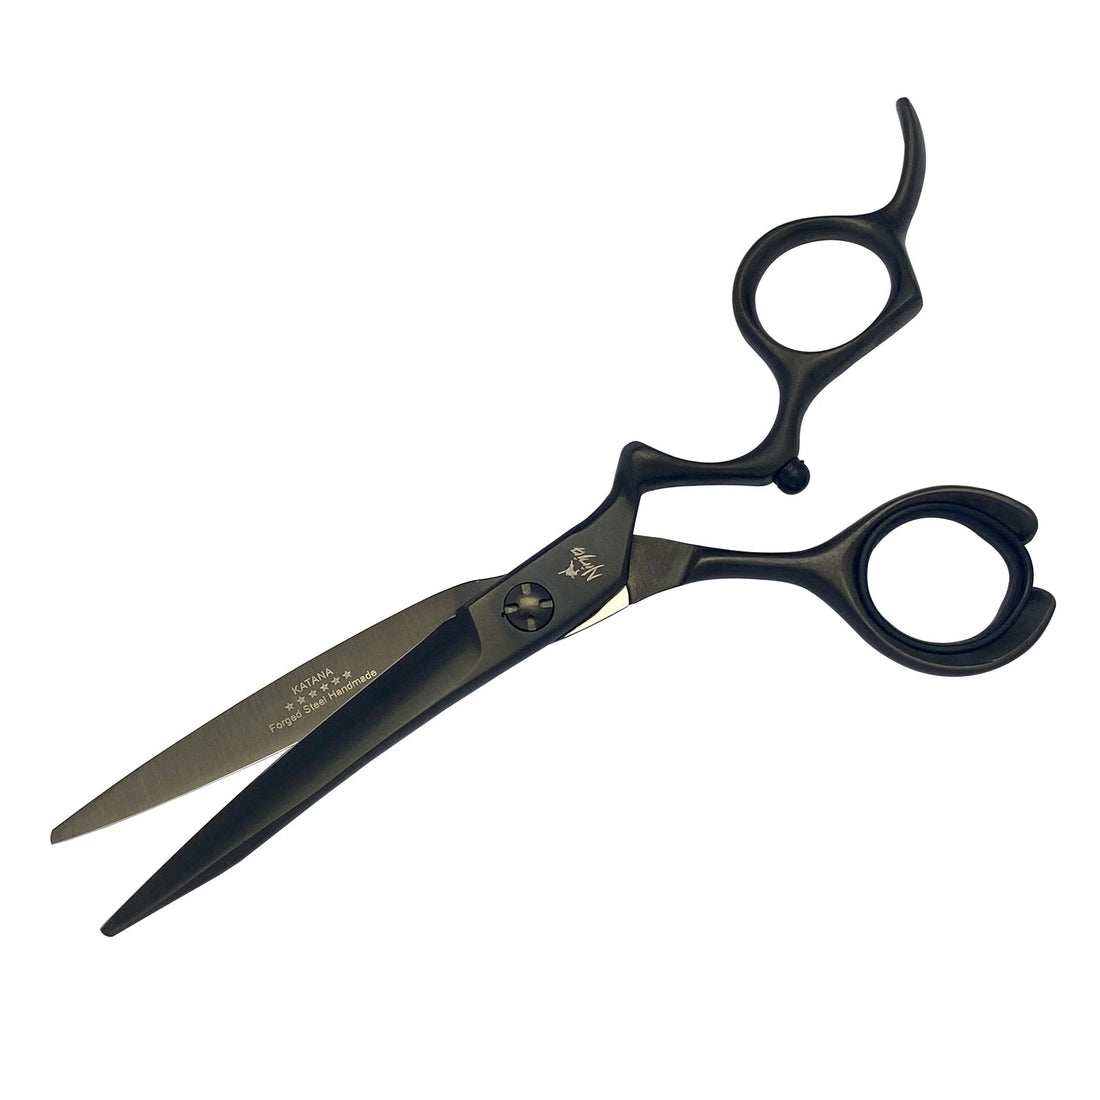 How to Take Awesome Care of Your Japanese Hairdressing Scissors and Shears